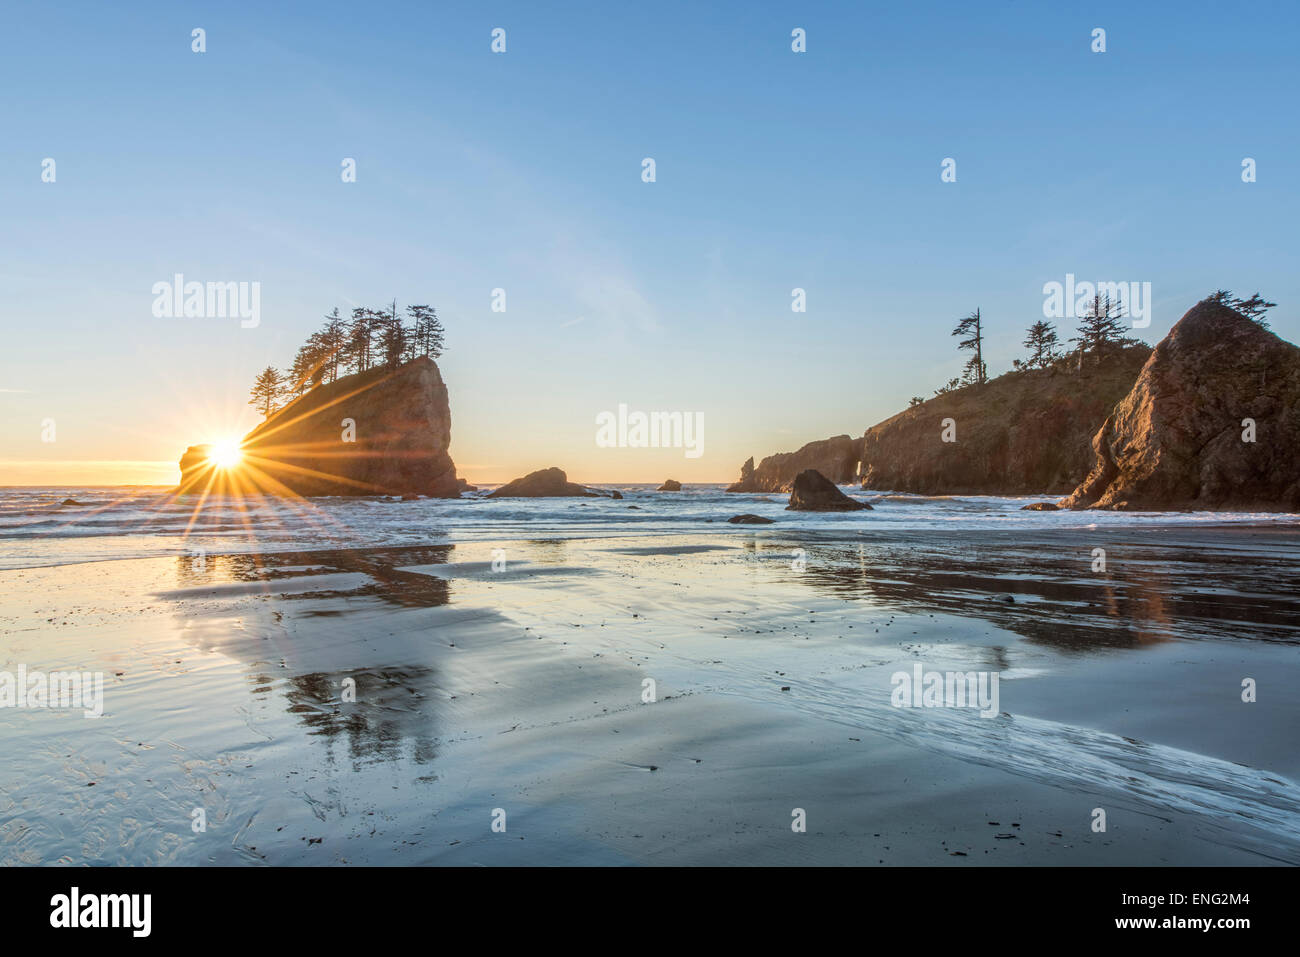 Sun rising over rock formations on beach Stock Photo